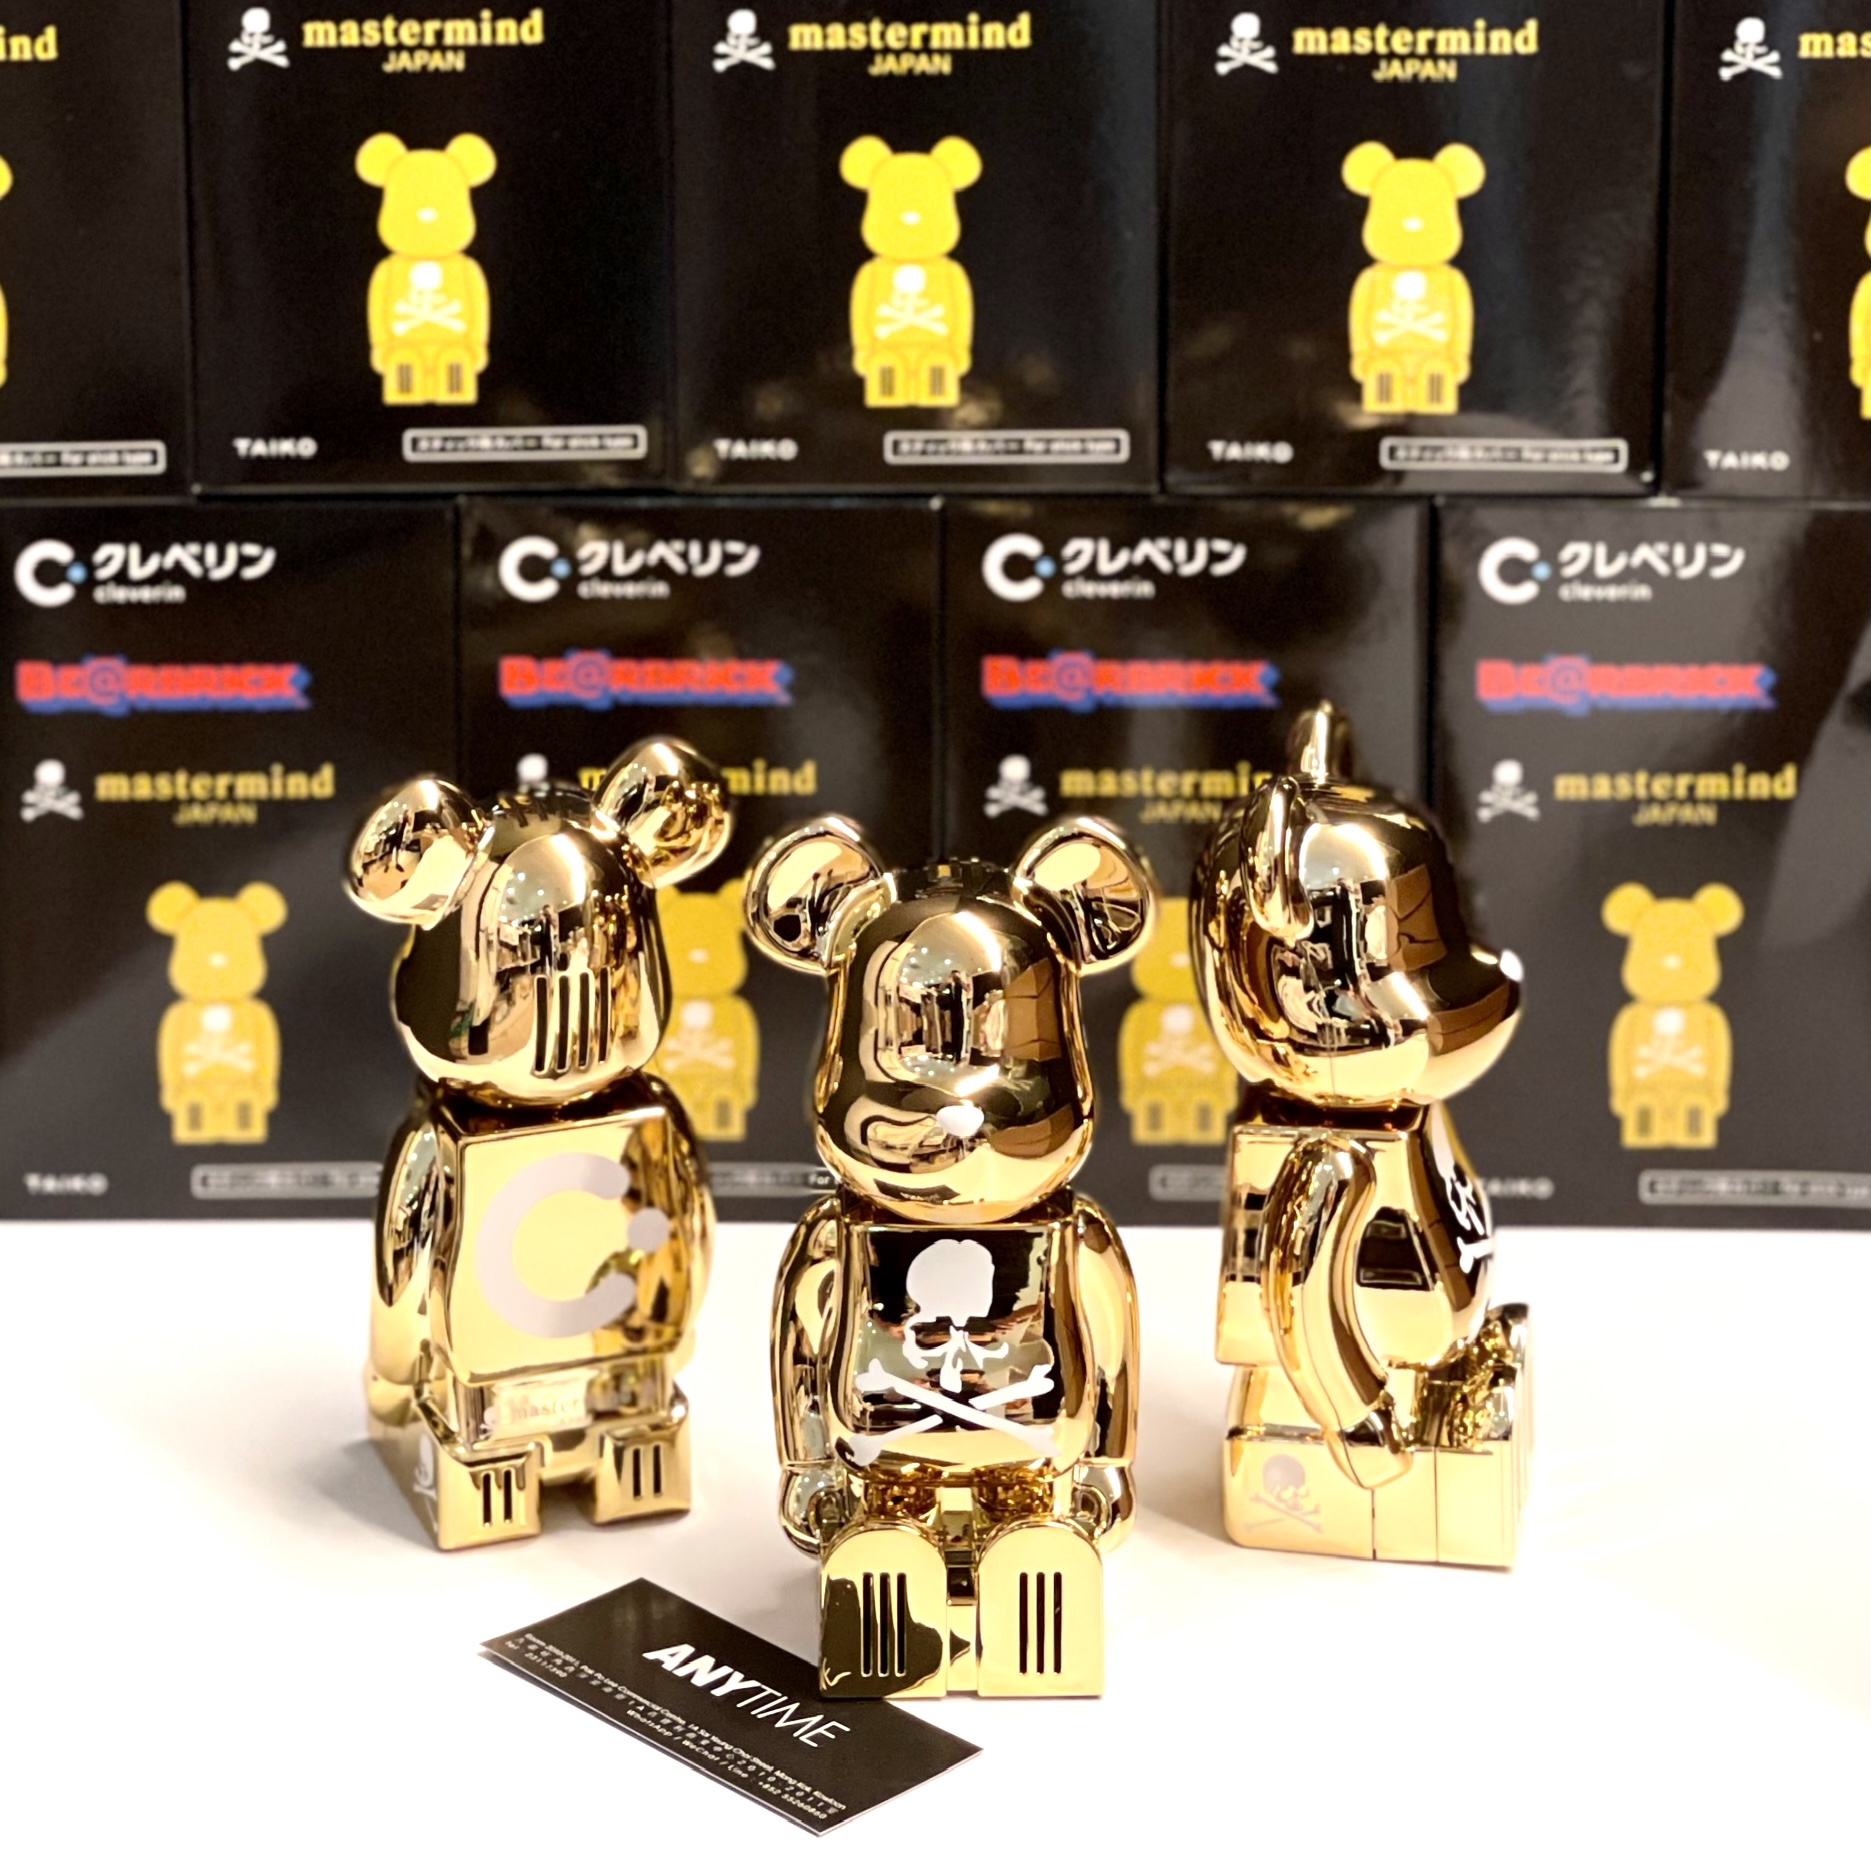 cleverin BE@RBRICK mastermind JAPANフィギュア